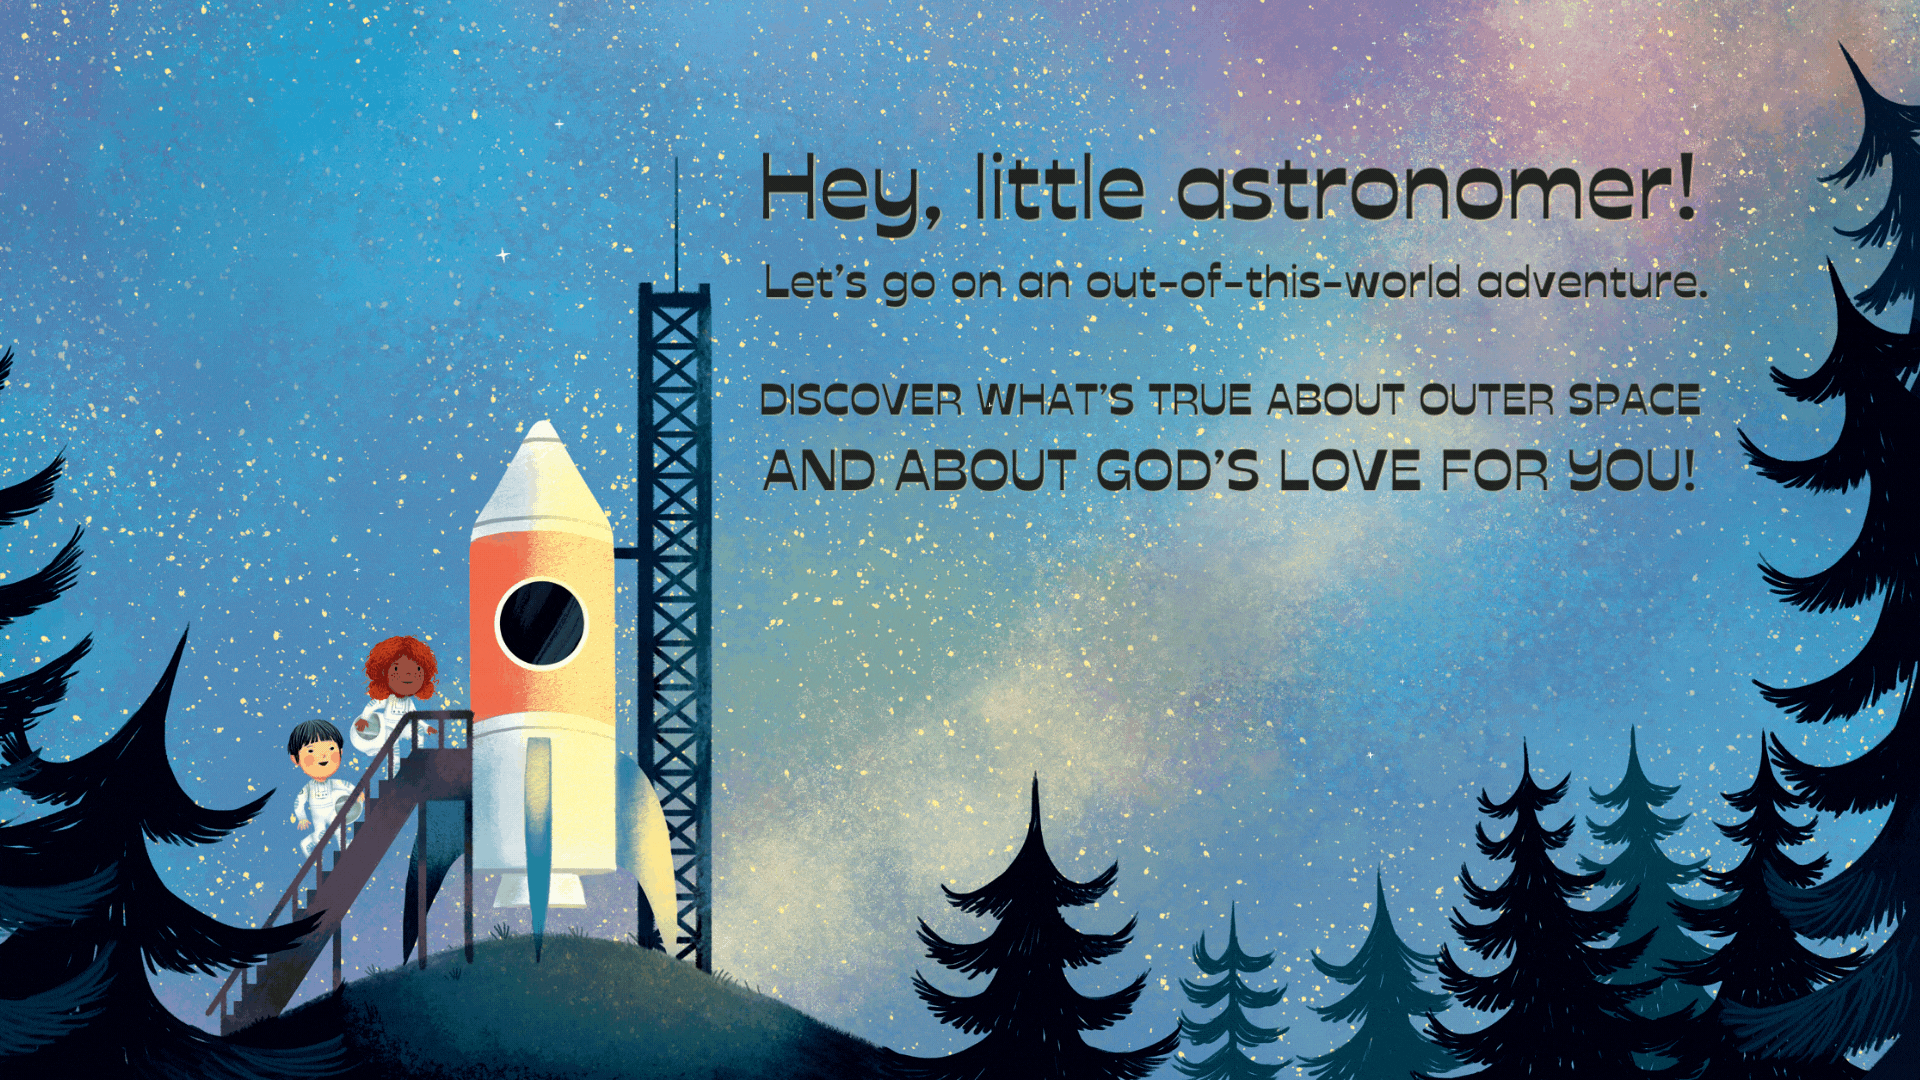 Hey, little astronomer! Let’s go on an out-of-this-world adventure. Discover what’s true about outer space and about God’s love for you!